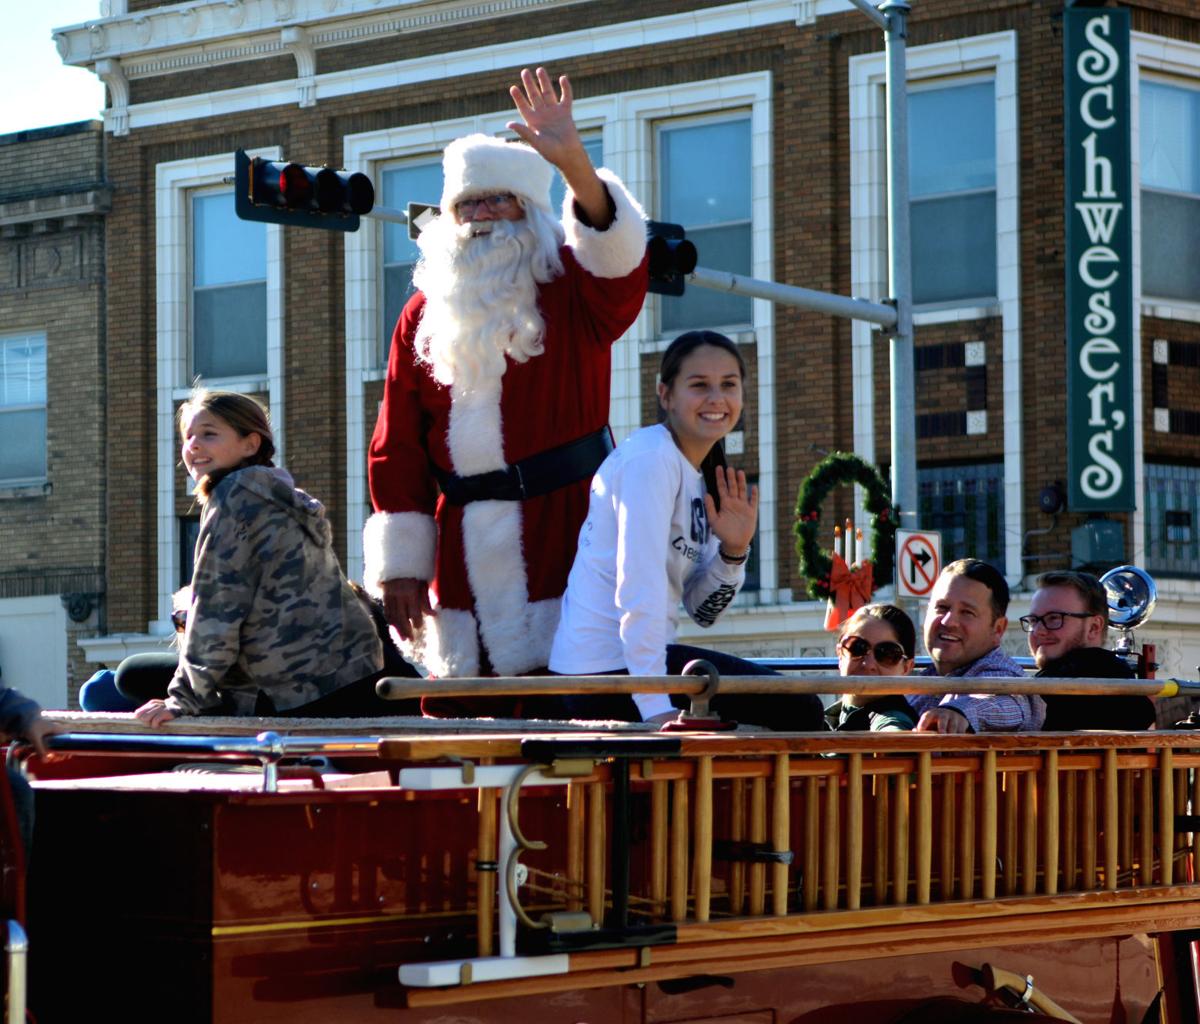 Santa and his friends arrive on the back of a vintage firetruck Saturday afternoon in downtown Columbus